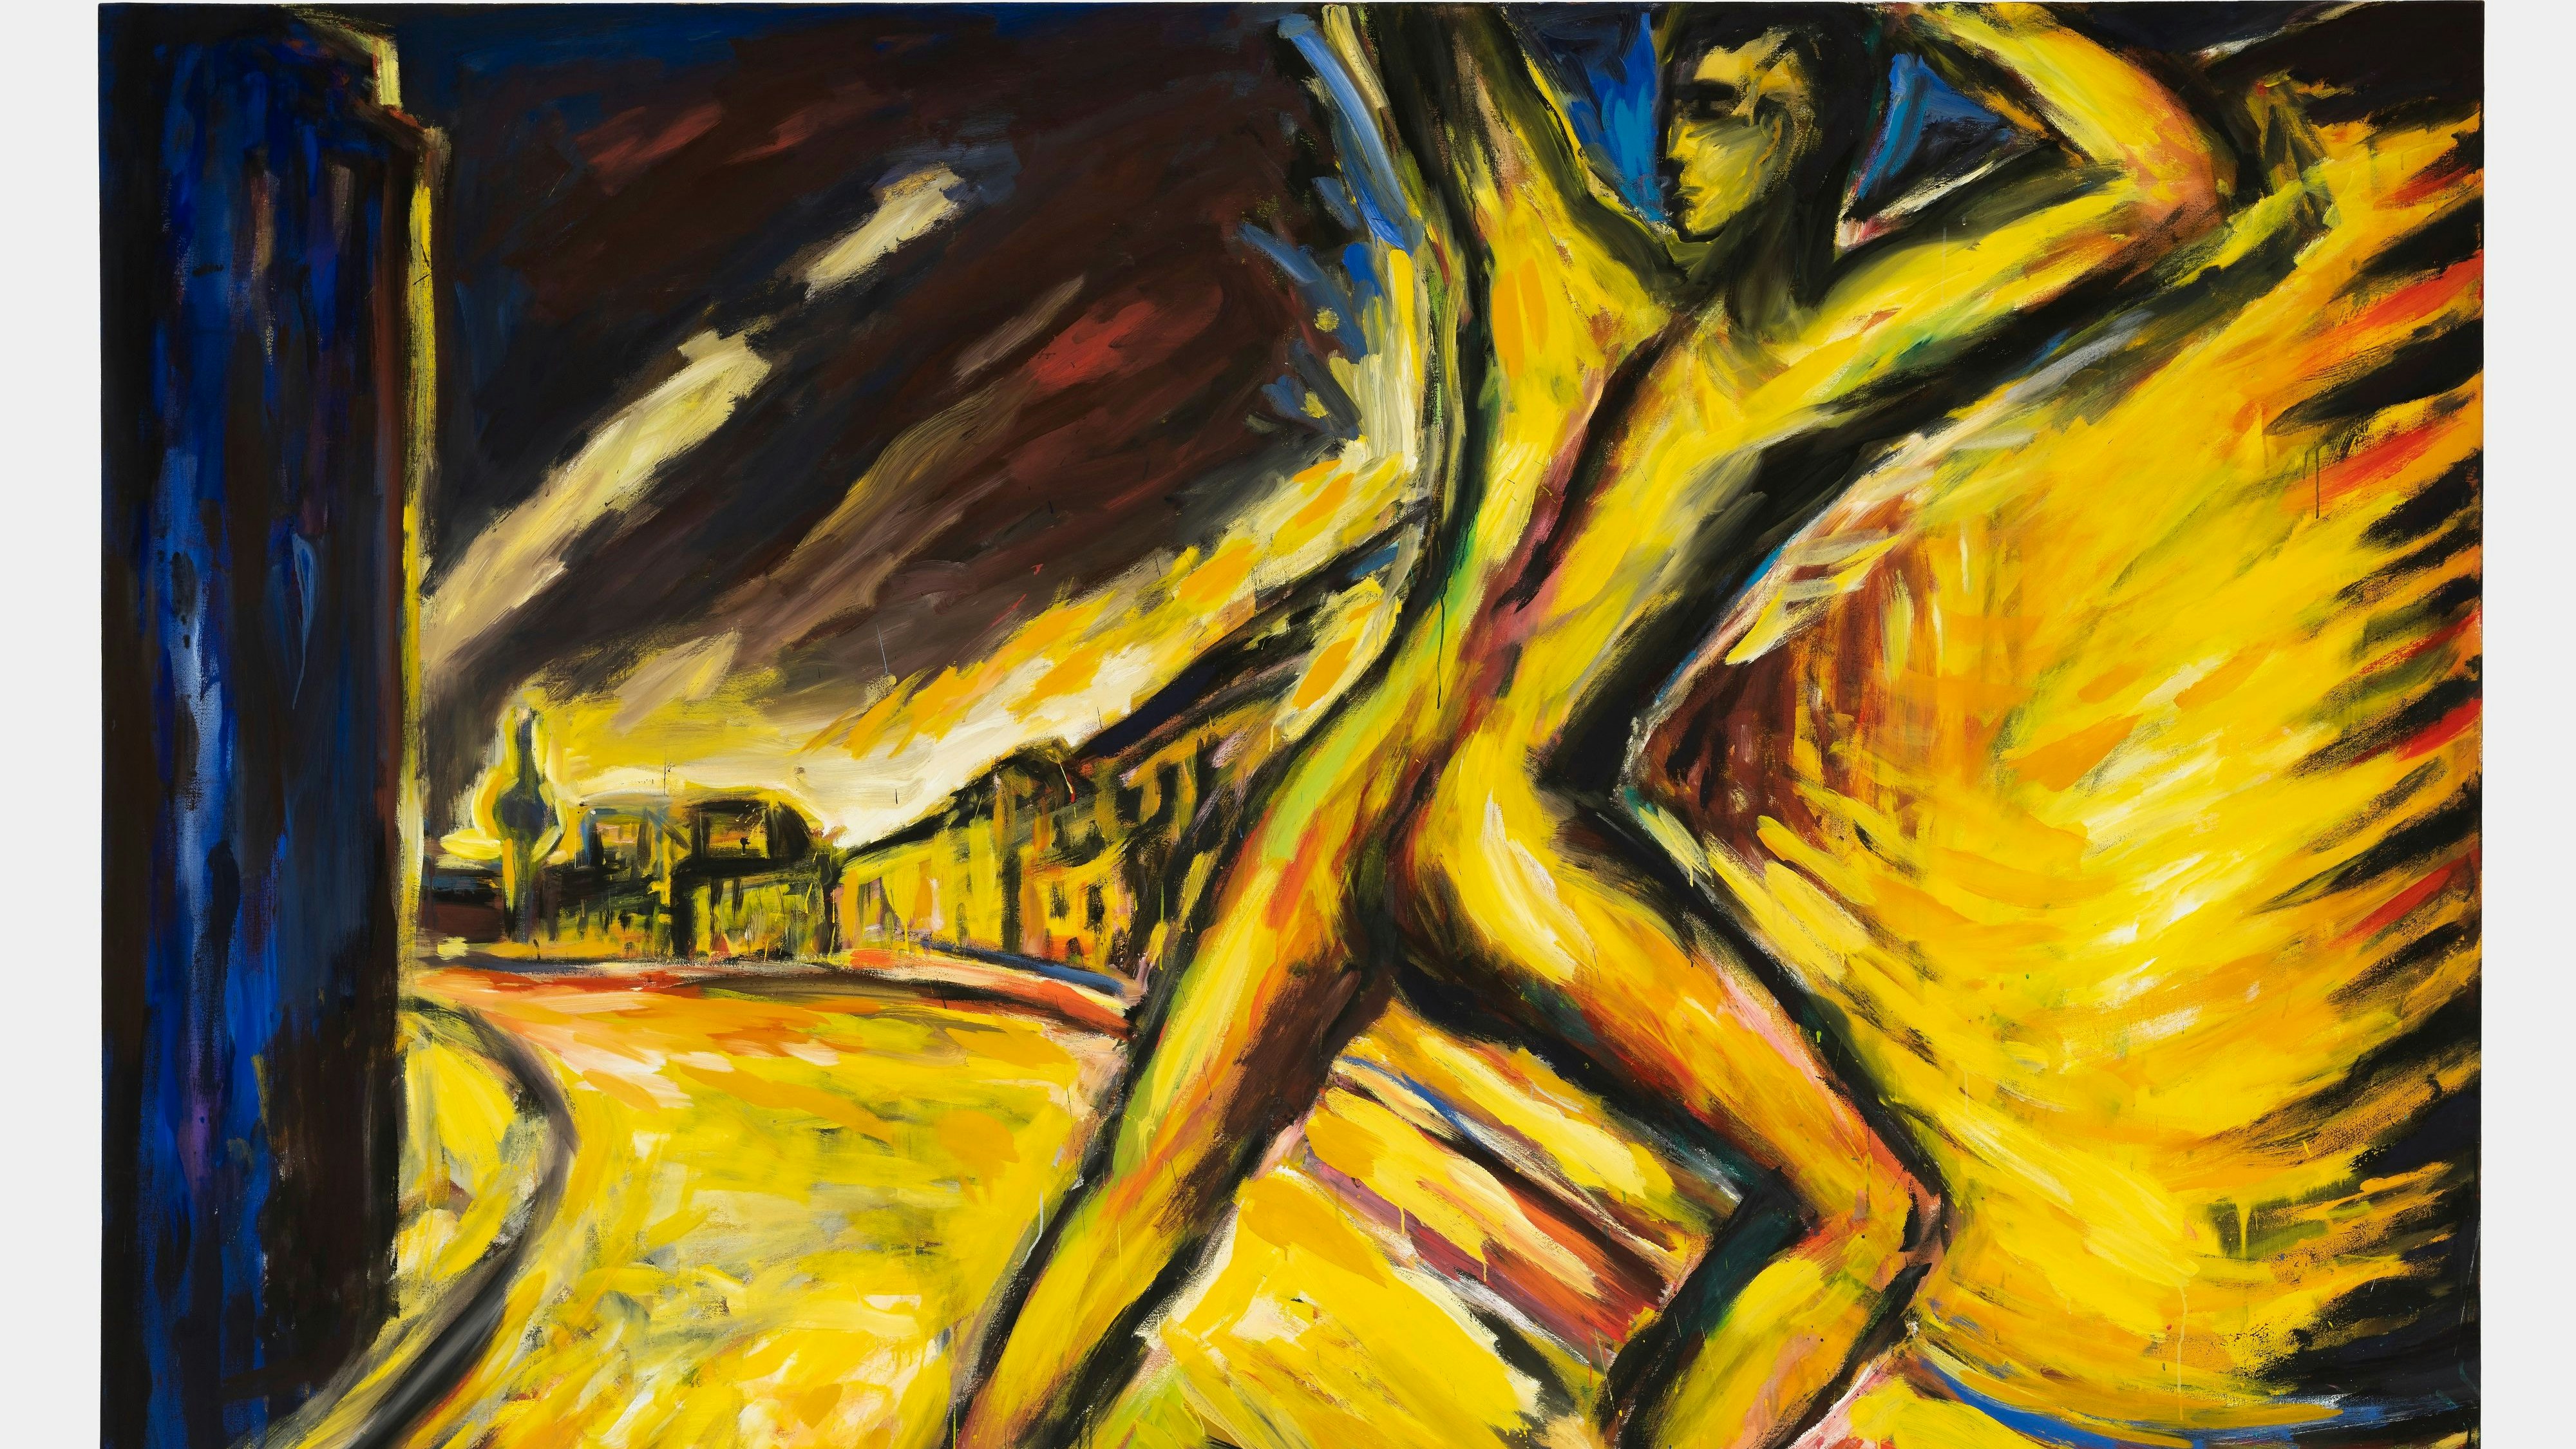 Helmut Middendorf: Die Straße; The Street, 1984 Acrylic on canvas 78-1/2 x 118 in. (199.5 x 299.5 cm) Hall Collection Courtesy Hall Art Foundation © the artist